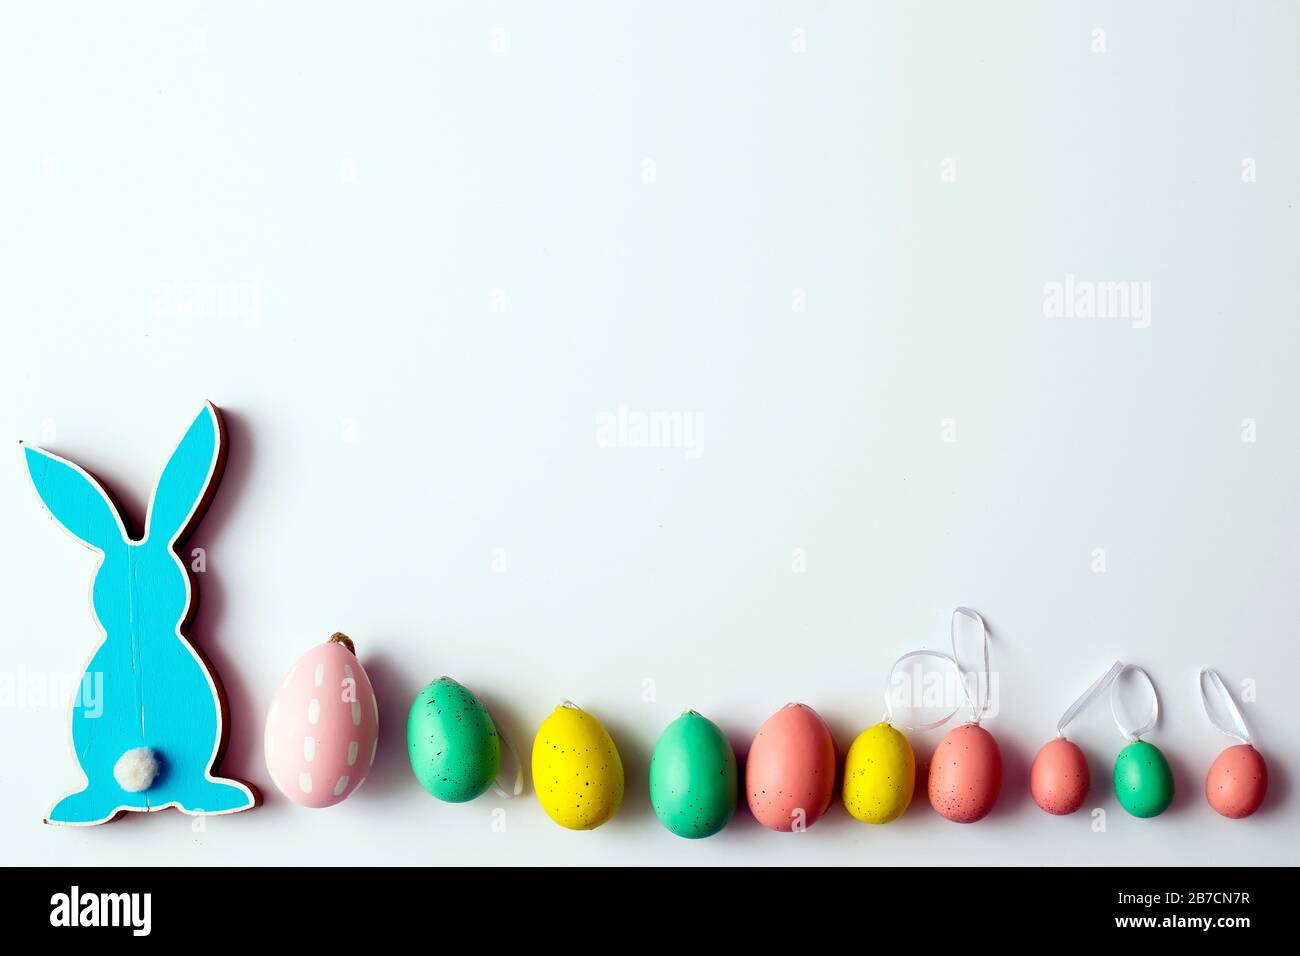 Blue wooden flat easter bunny with plastic eggs lies on a white background. Copy space Stock Photo